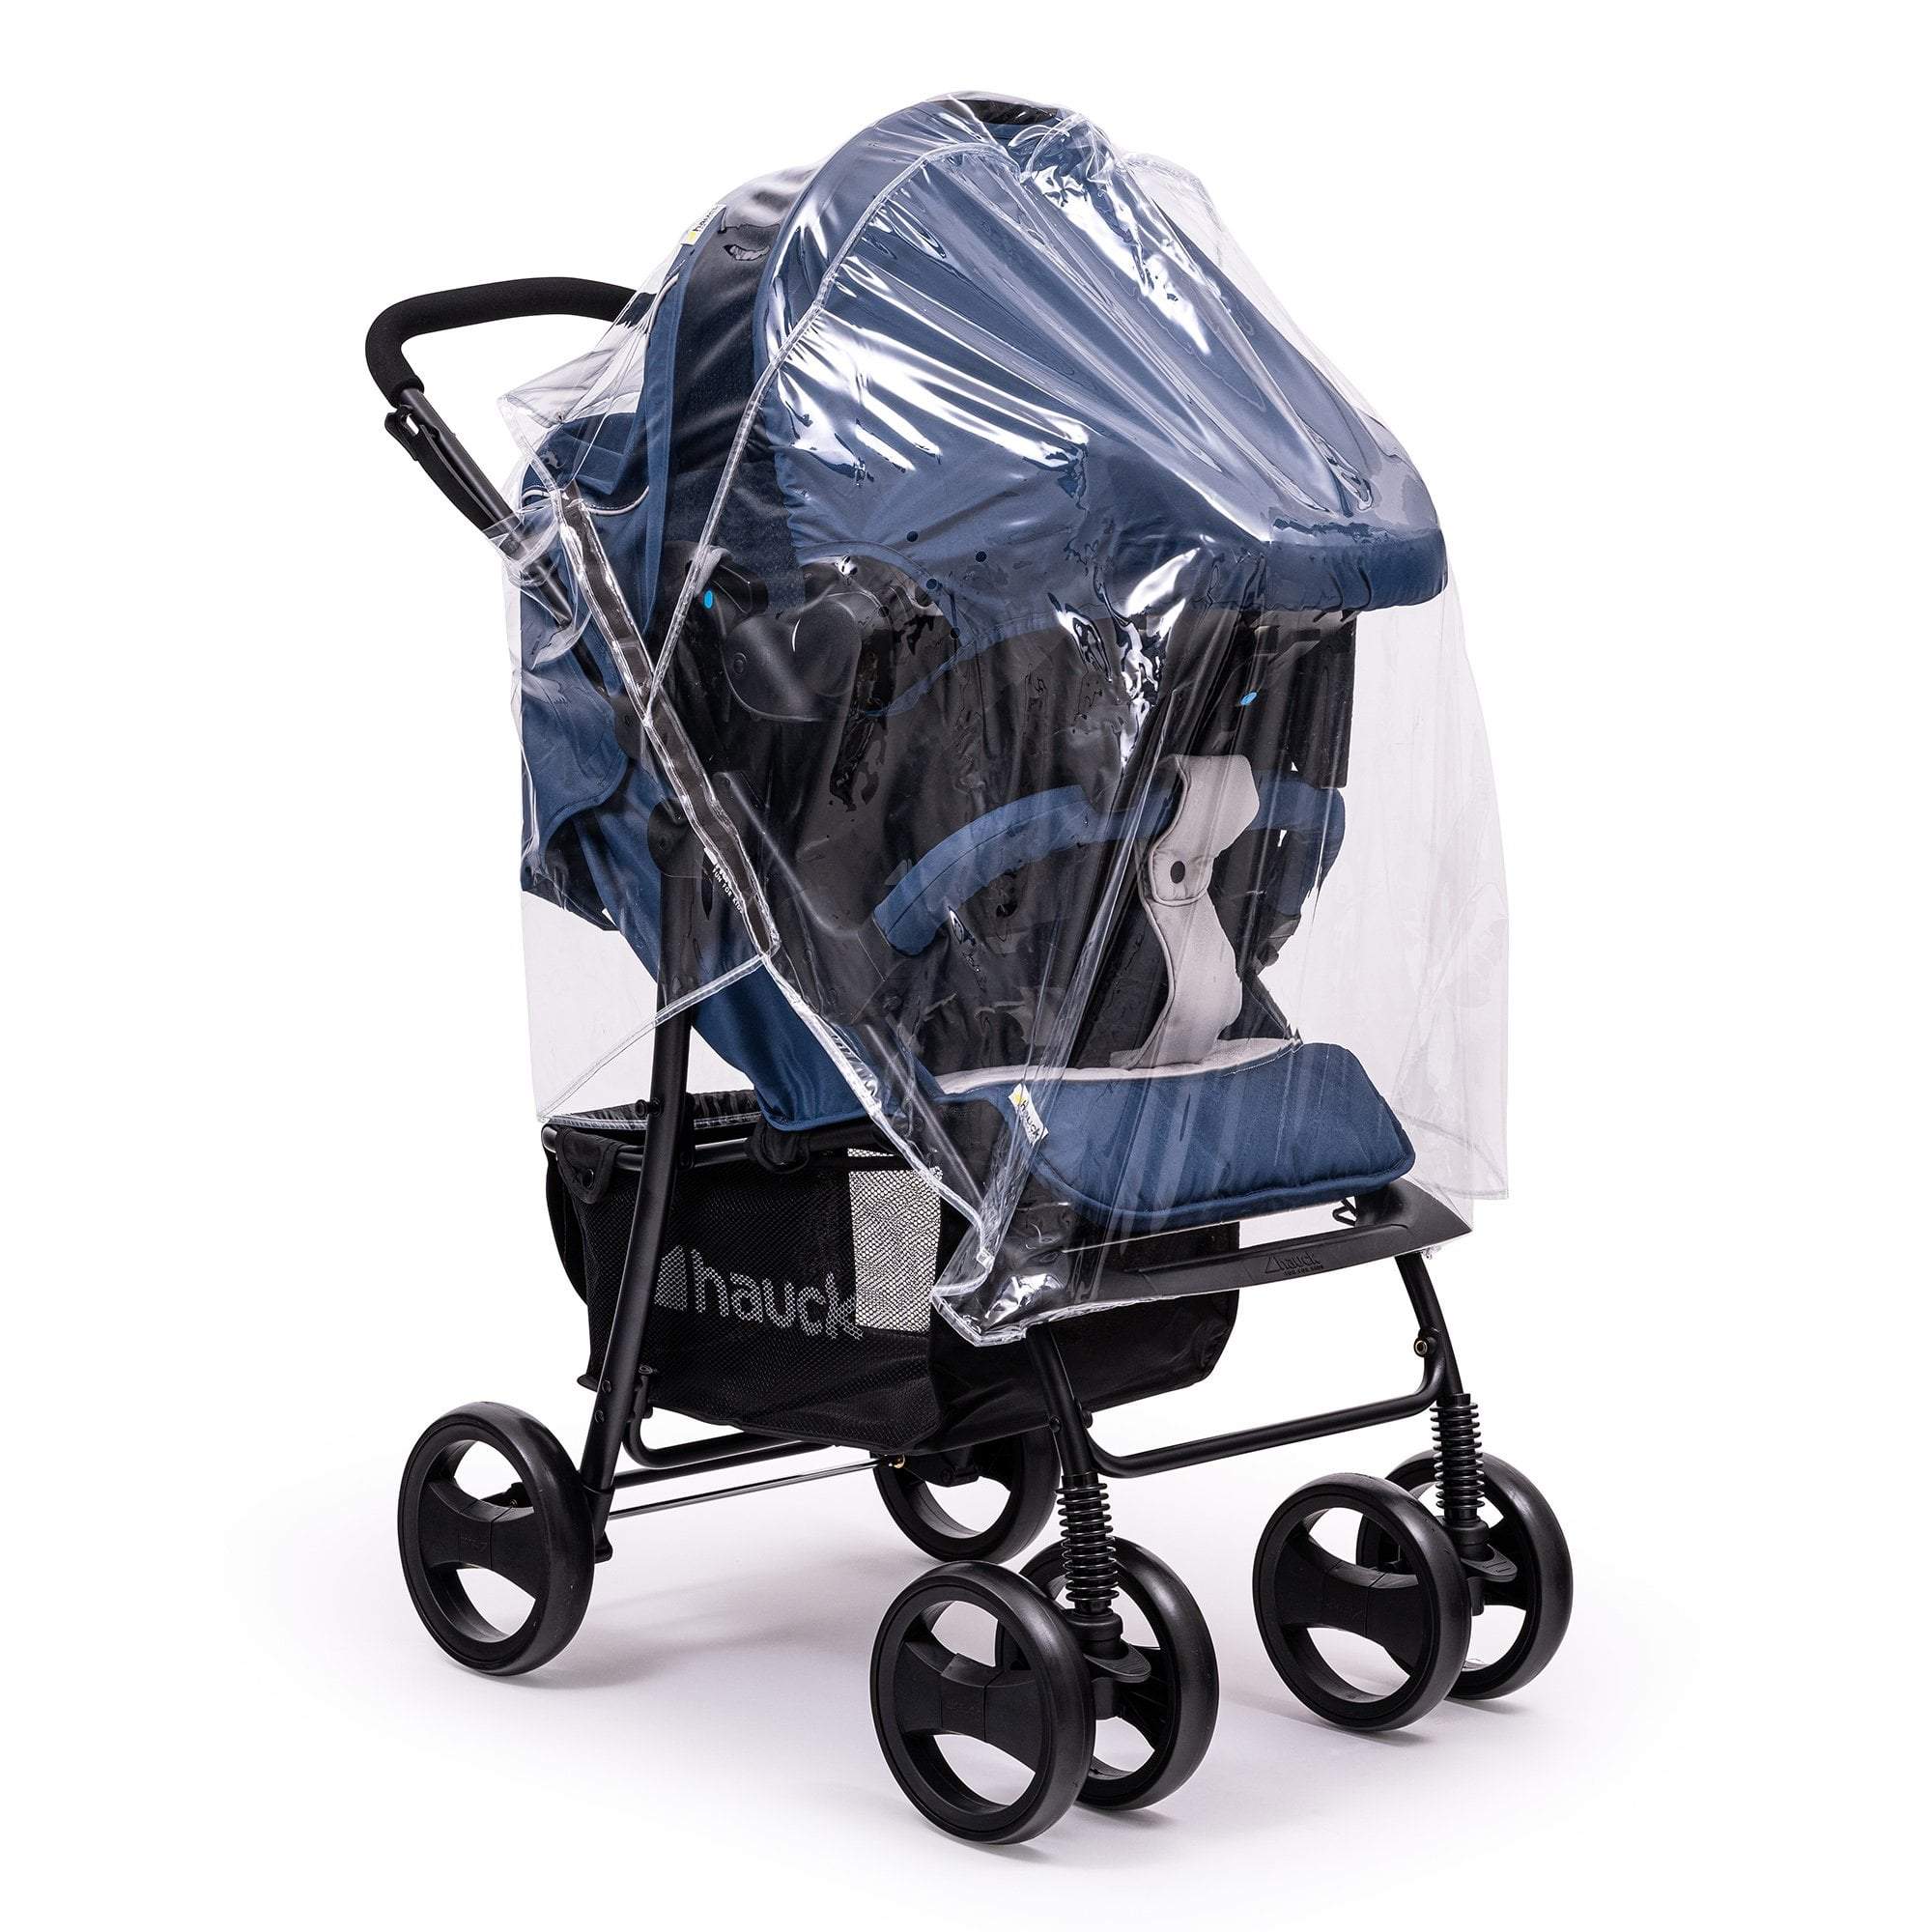 Travel System Raincover Compatible with Nurse - Fits All Models - For Your Little One